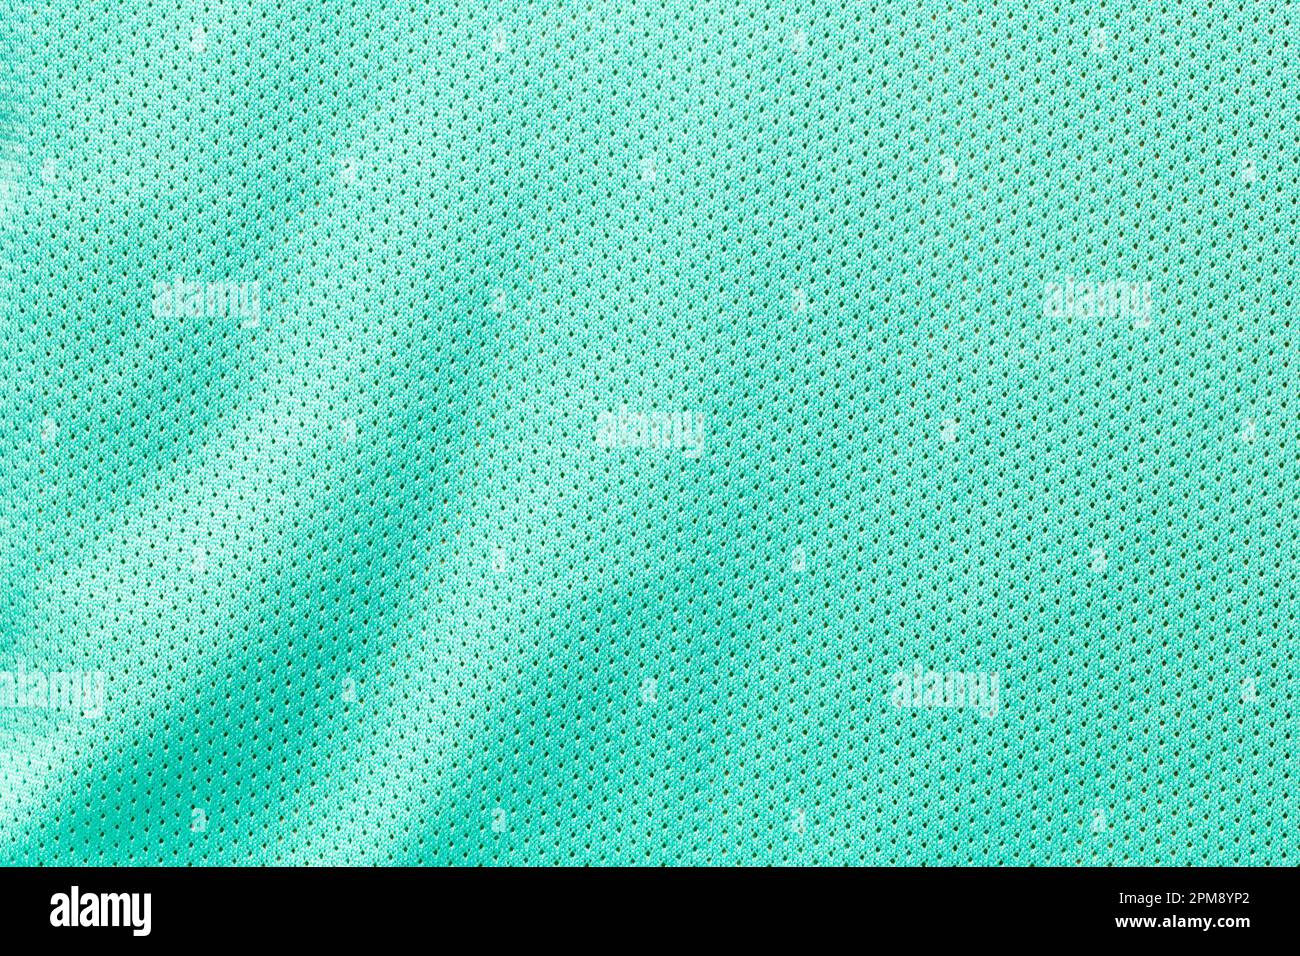 Canvas sackcloth woven texture pattern background in teal cyan blue color Stock Photo